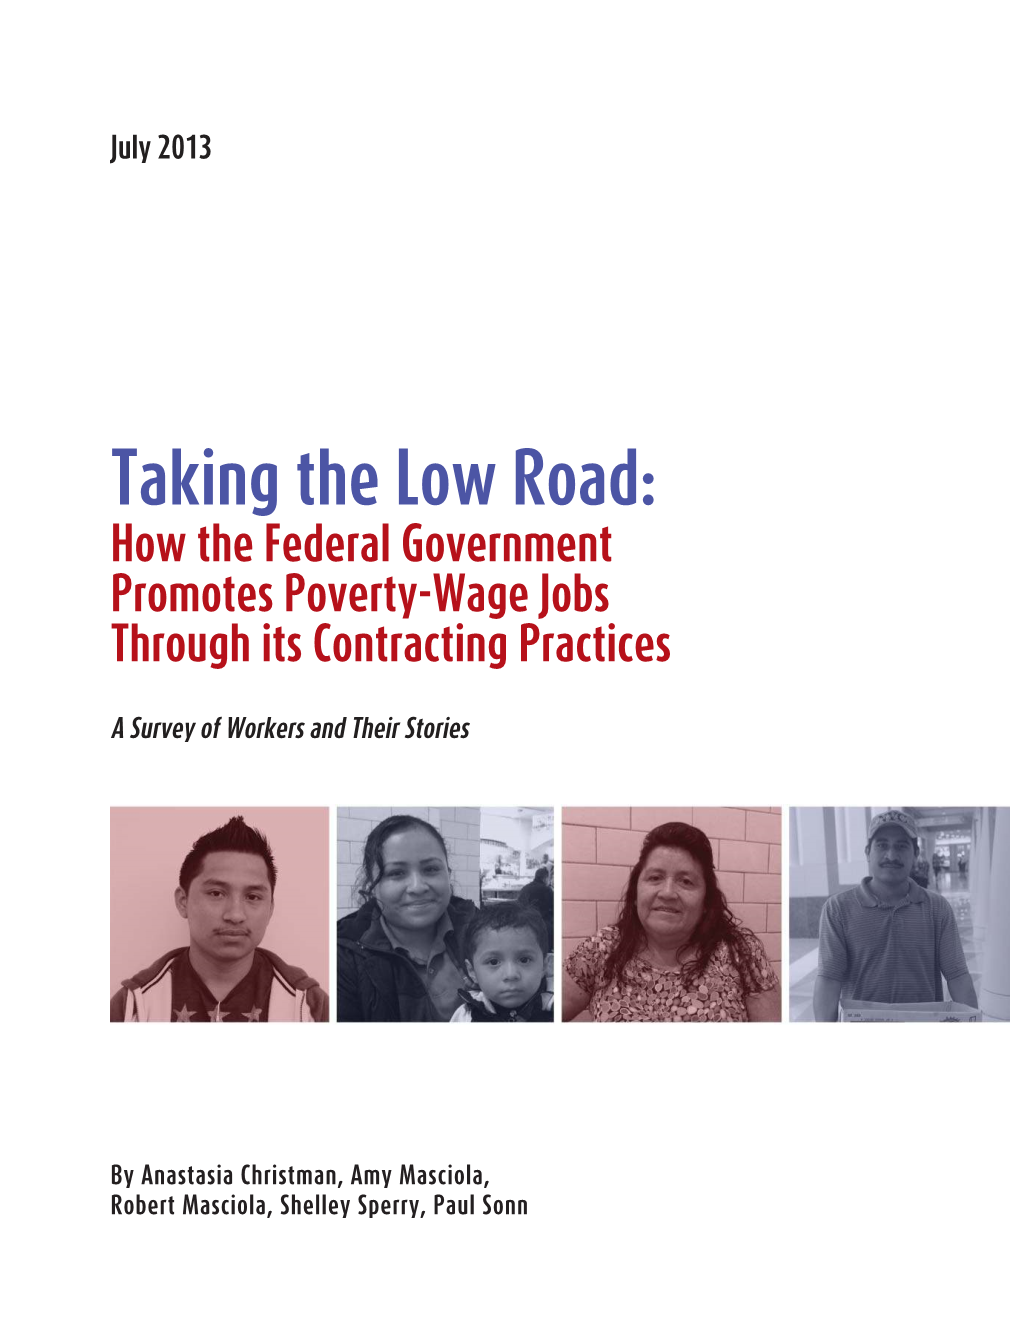 Taking the Low Road: How the Federal Government Promotes Poverty-Wage Jobs Through Its Contracting Practices